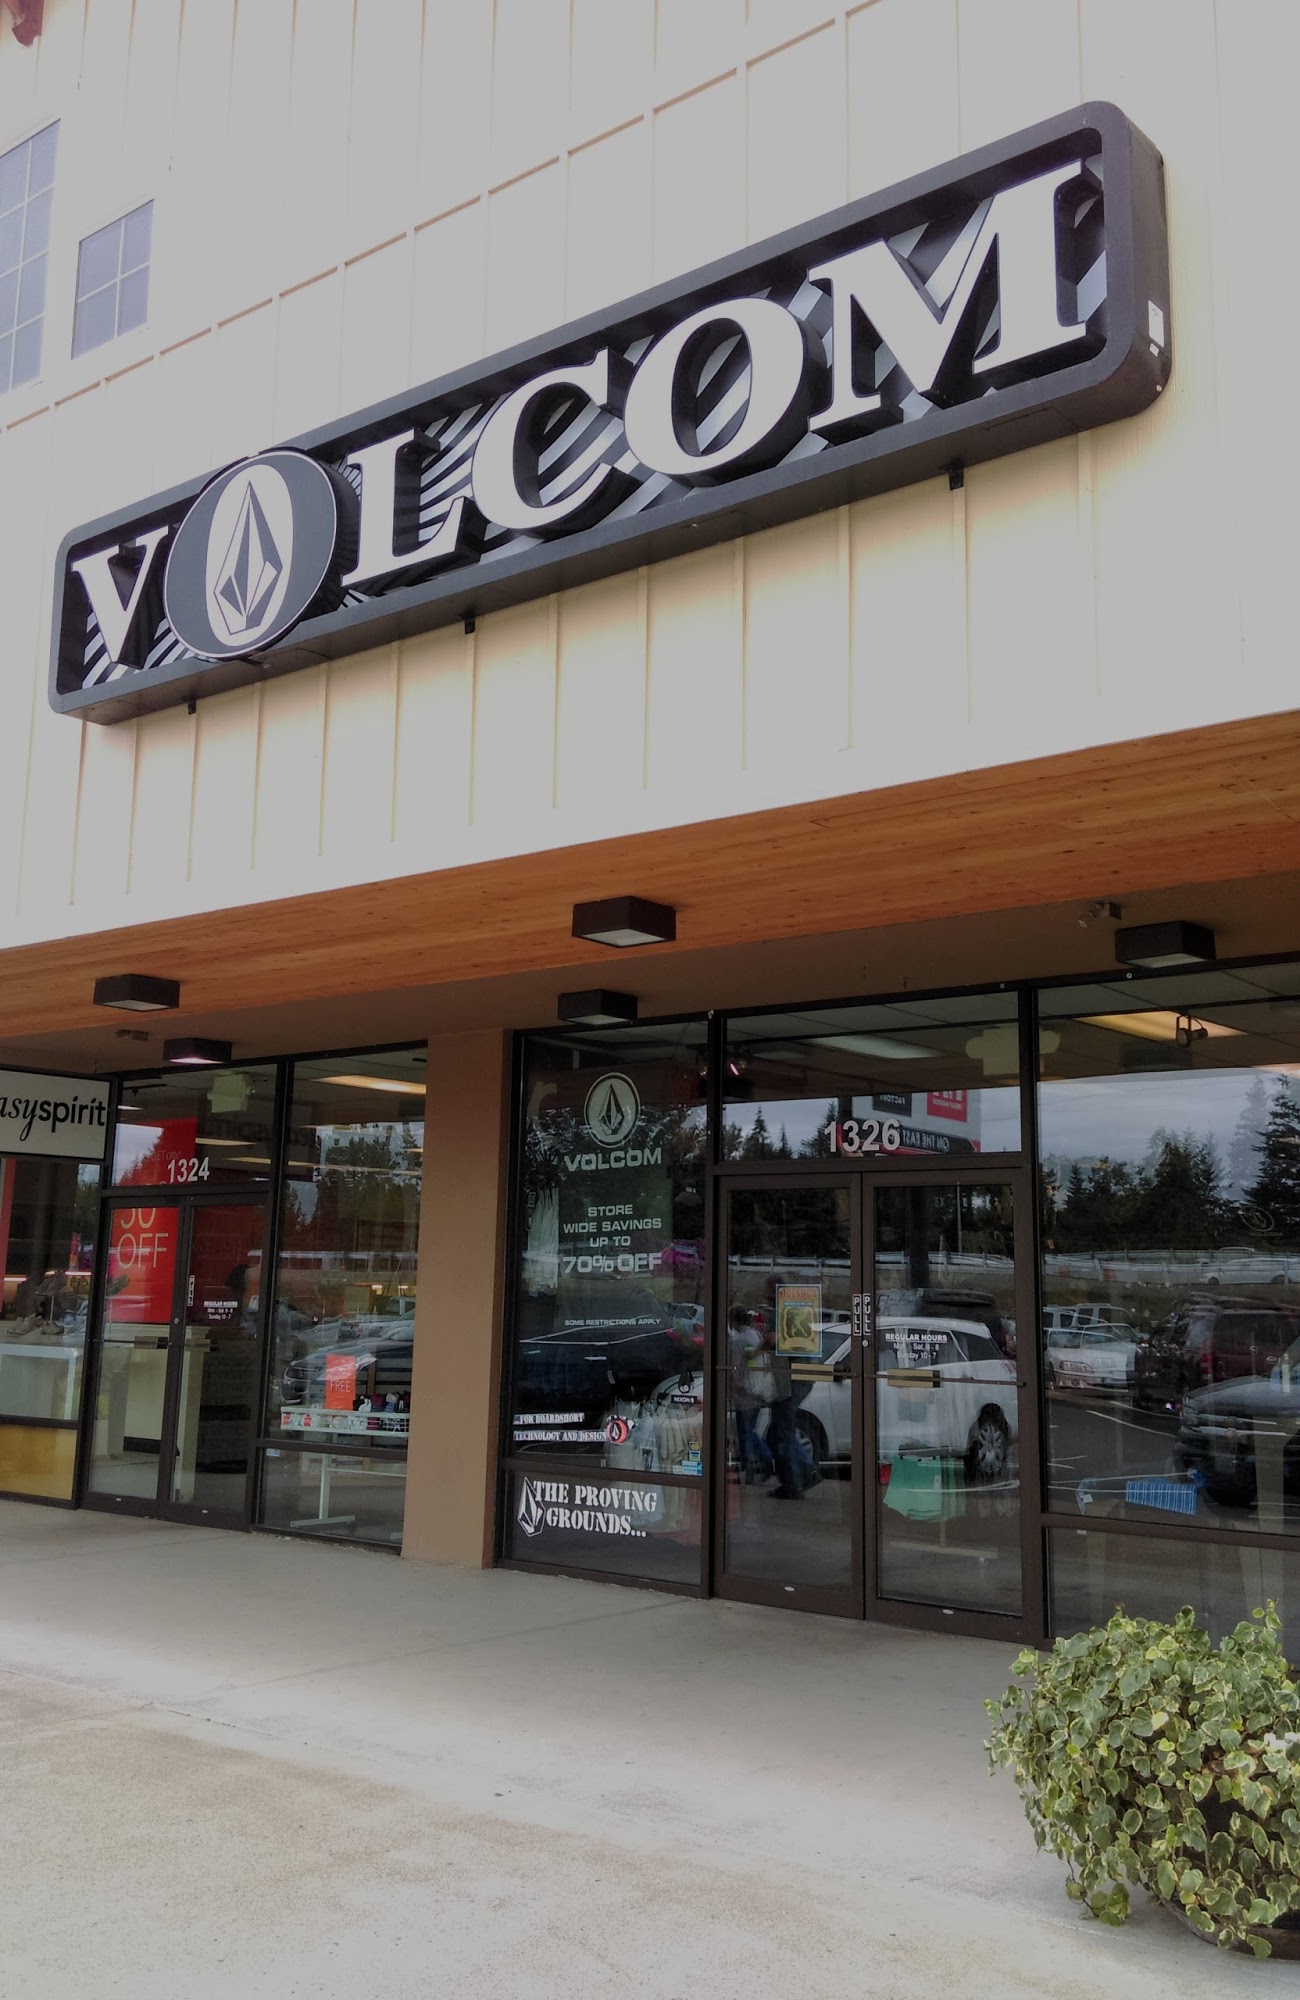 Volcom Outlet